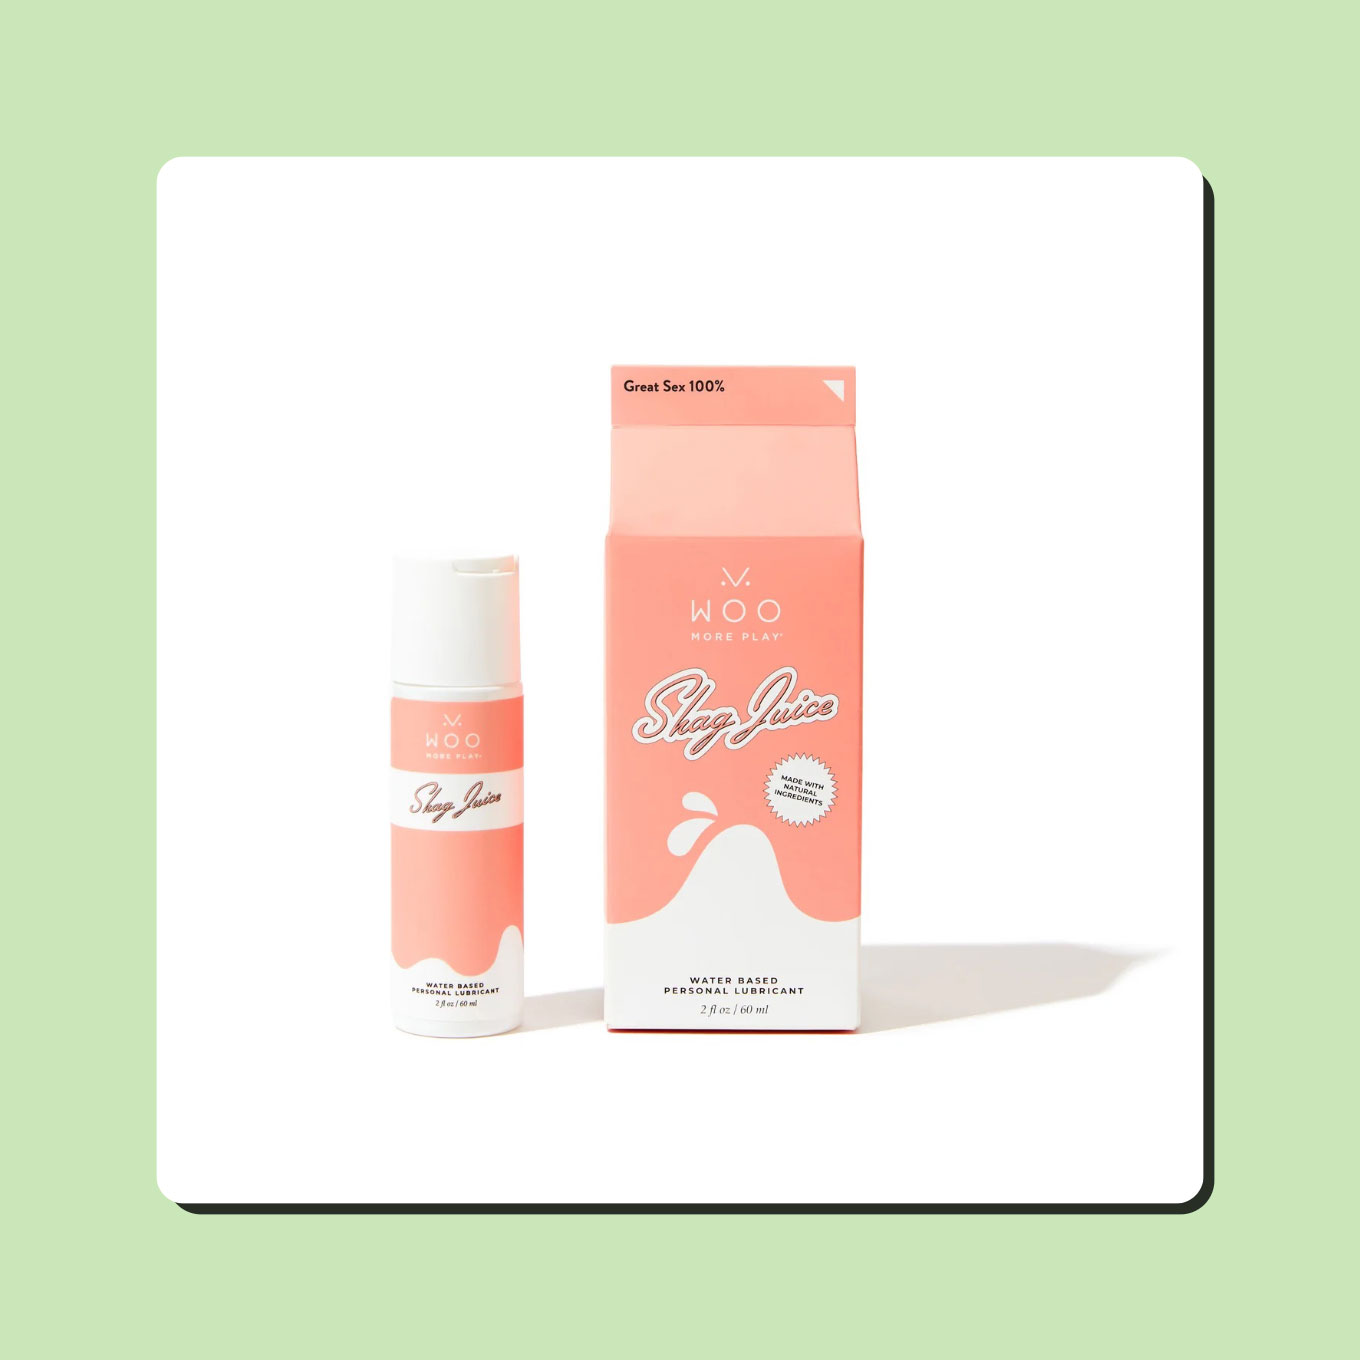 Shag Juice lube, packaged in a pink milk carton 